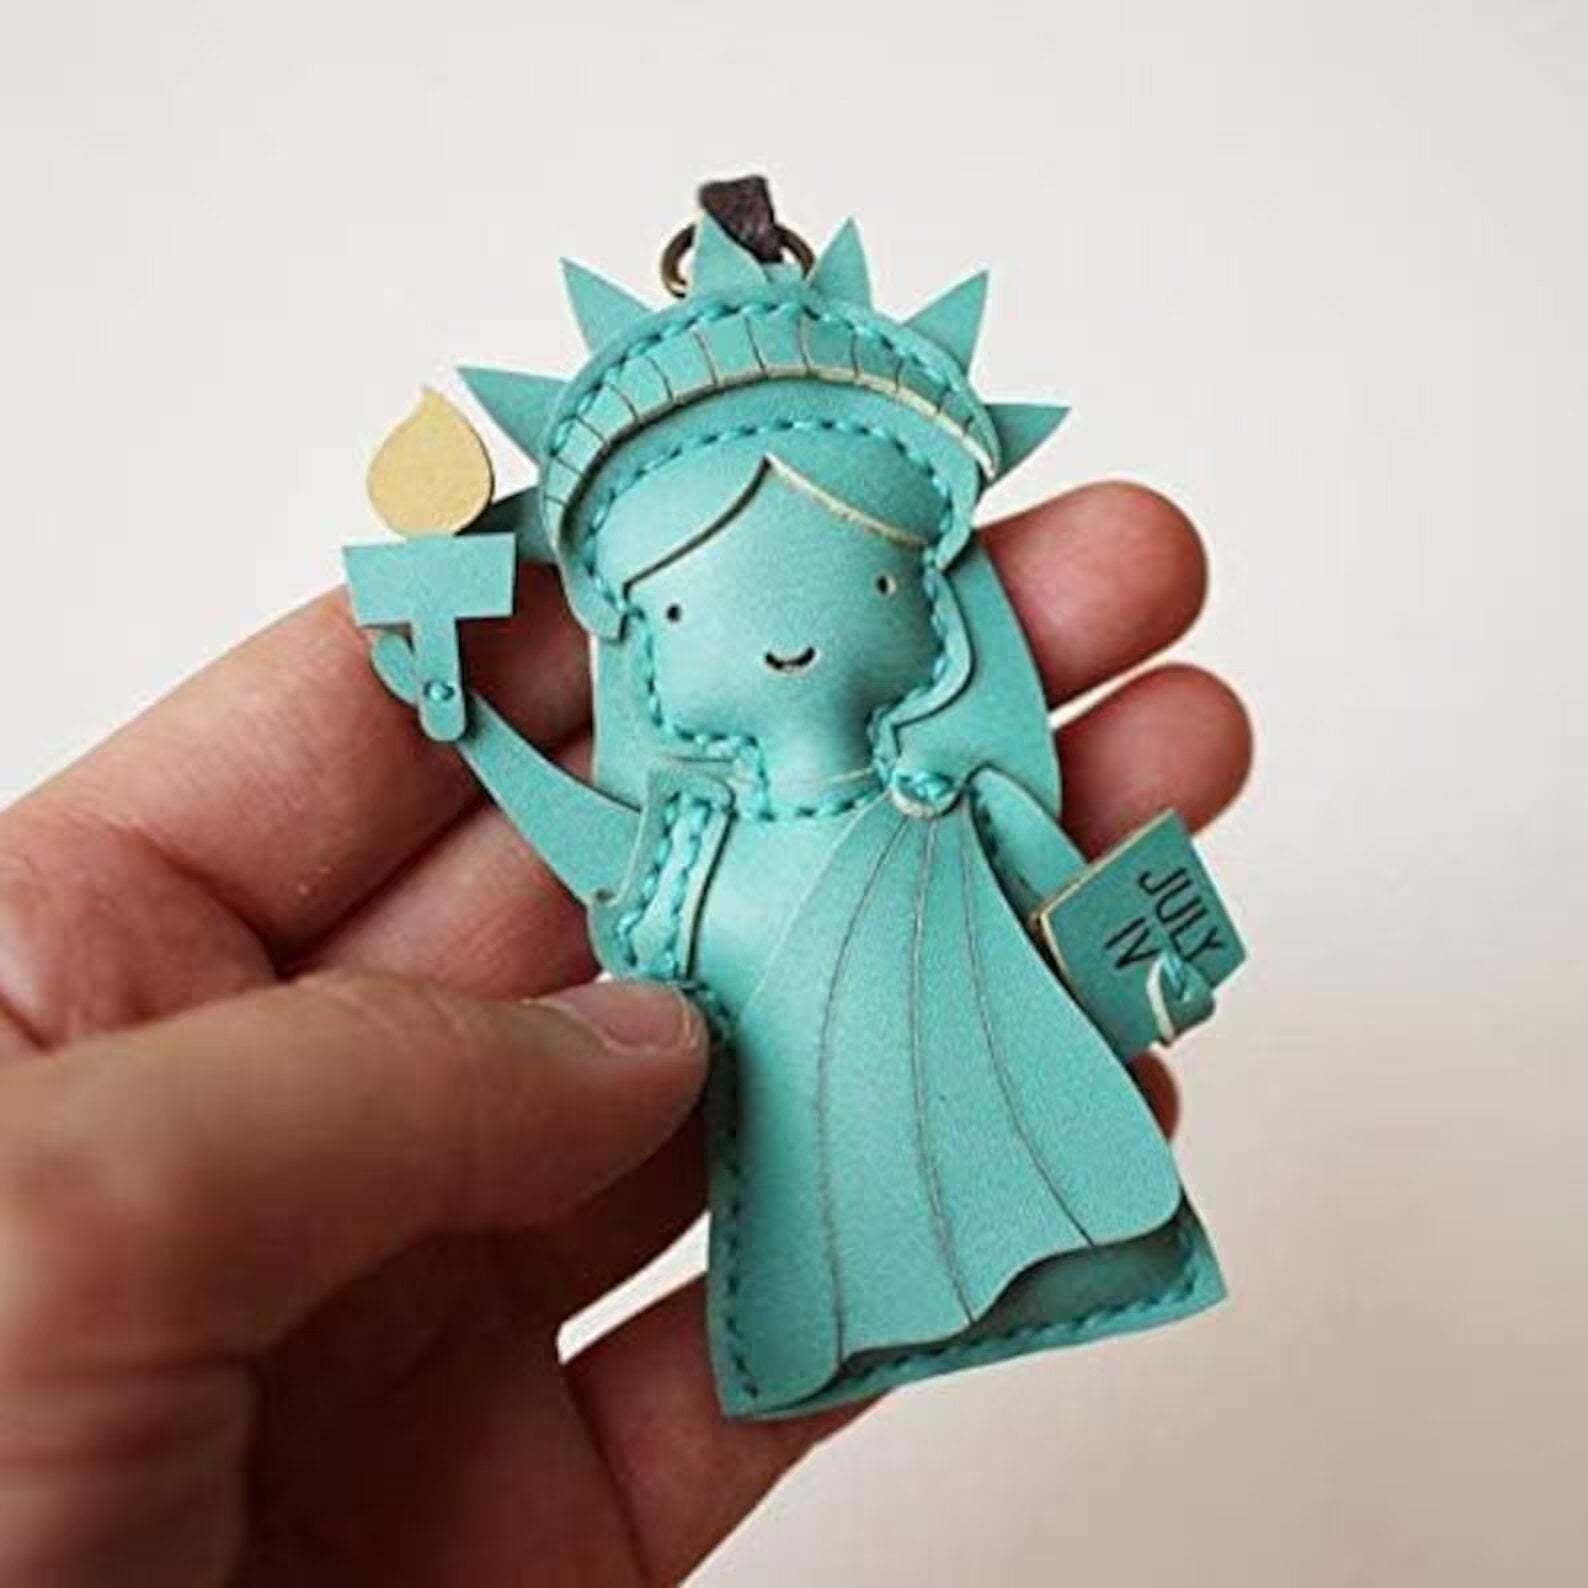 Lady of Liberty Leather Bag Charm